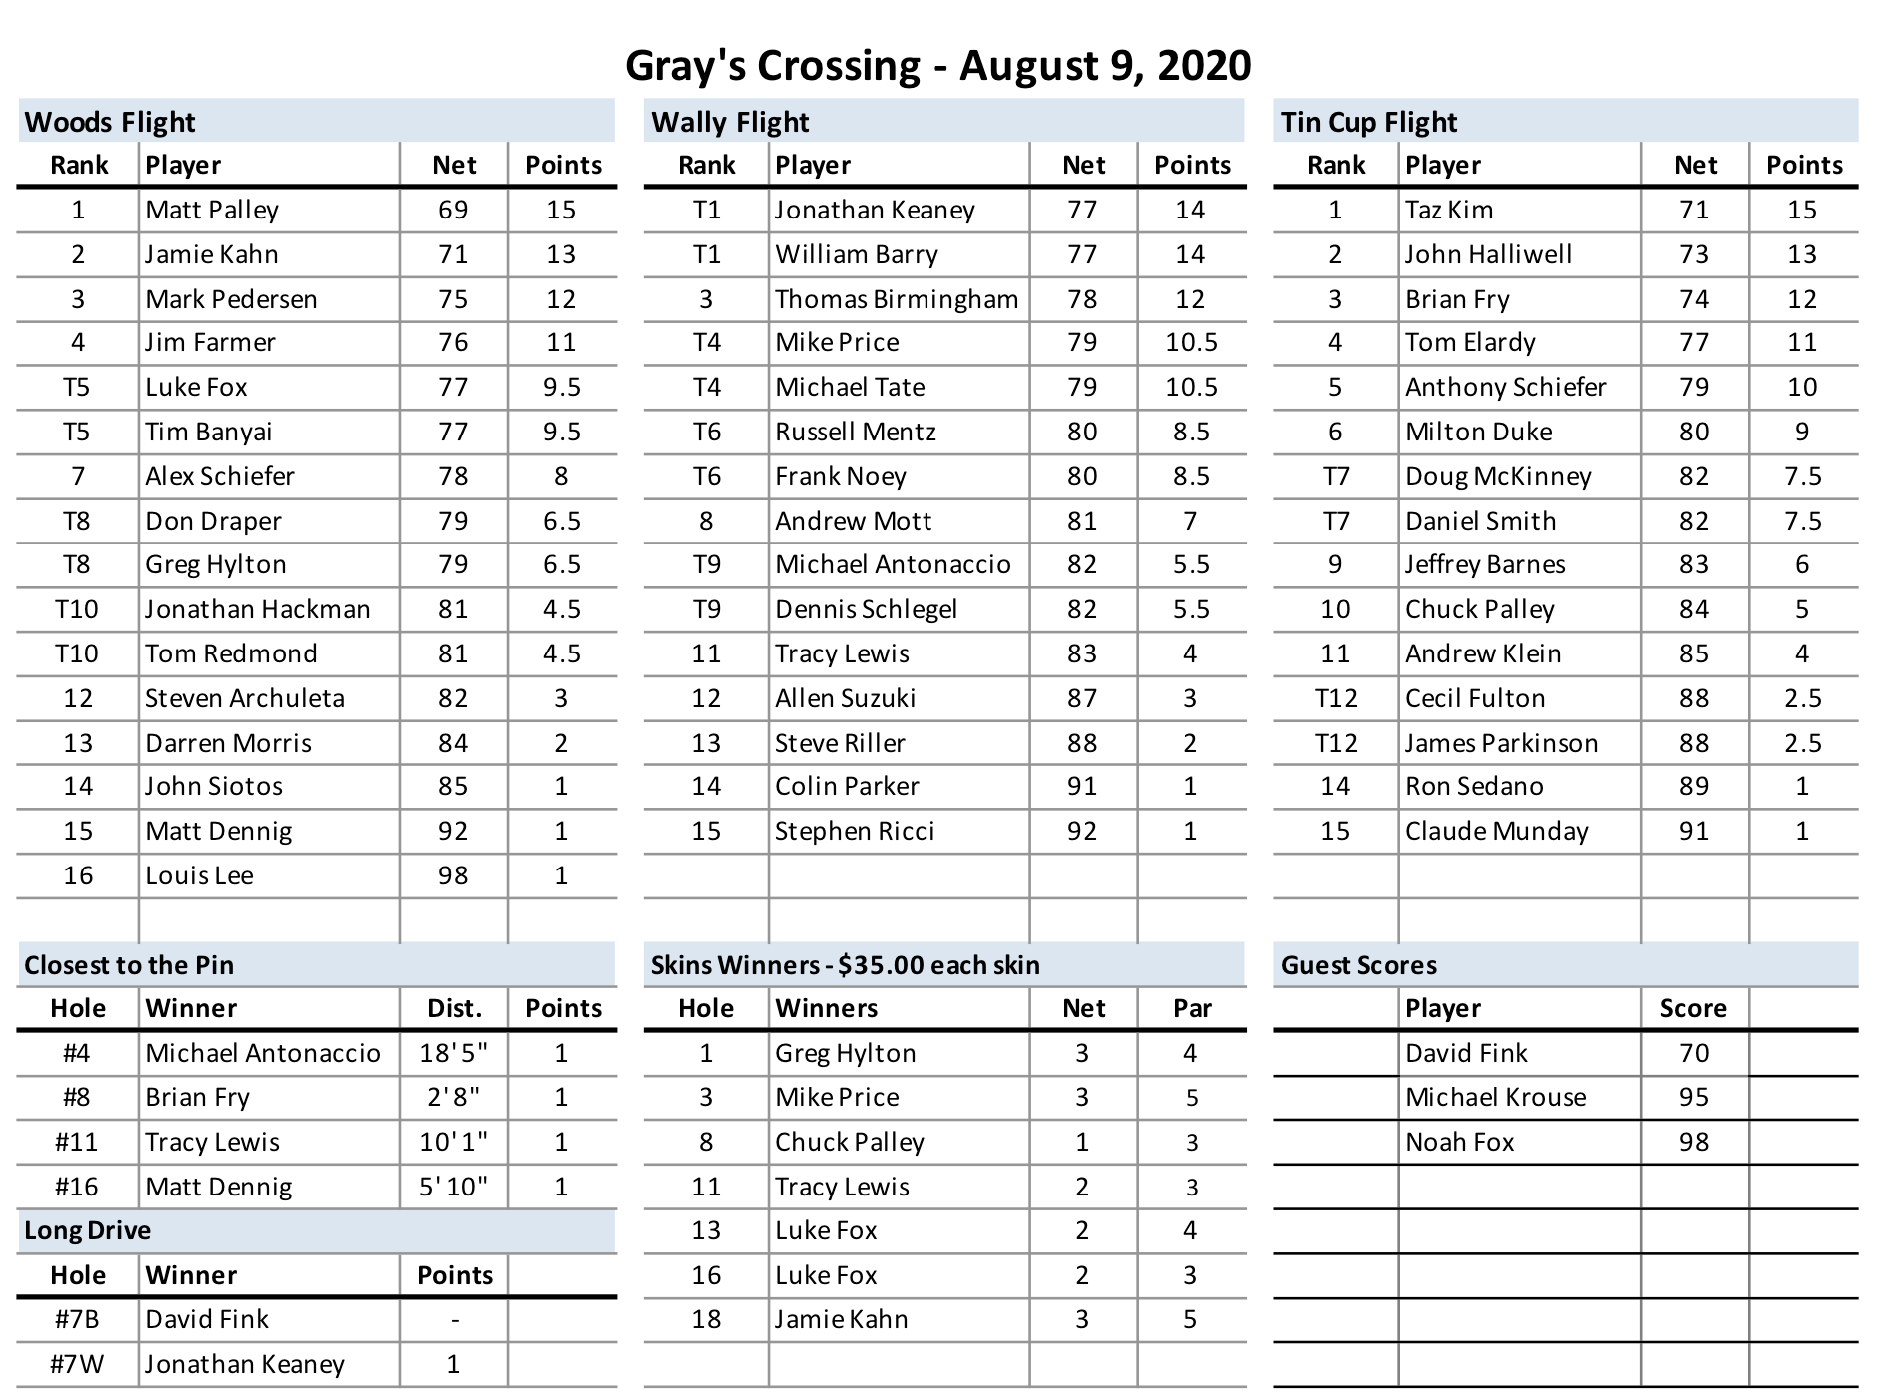 Grays Crossing Results